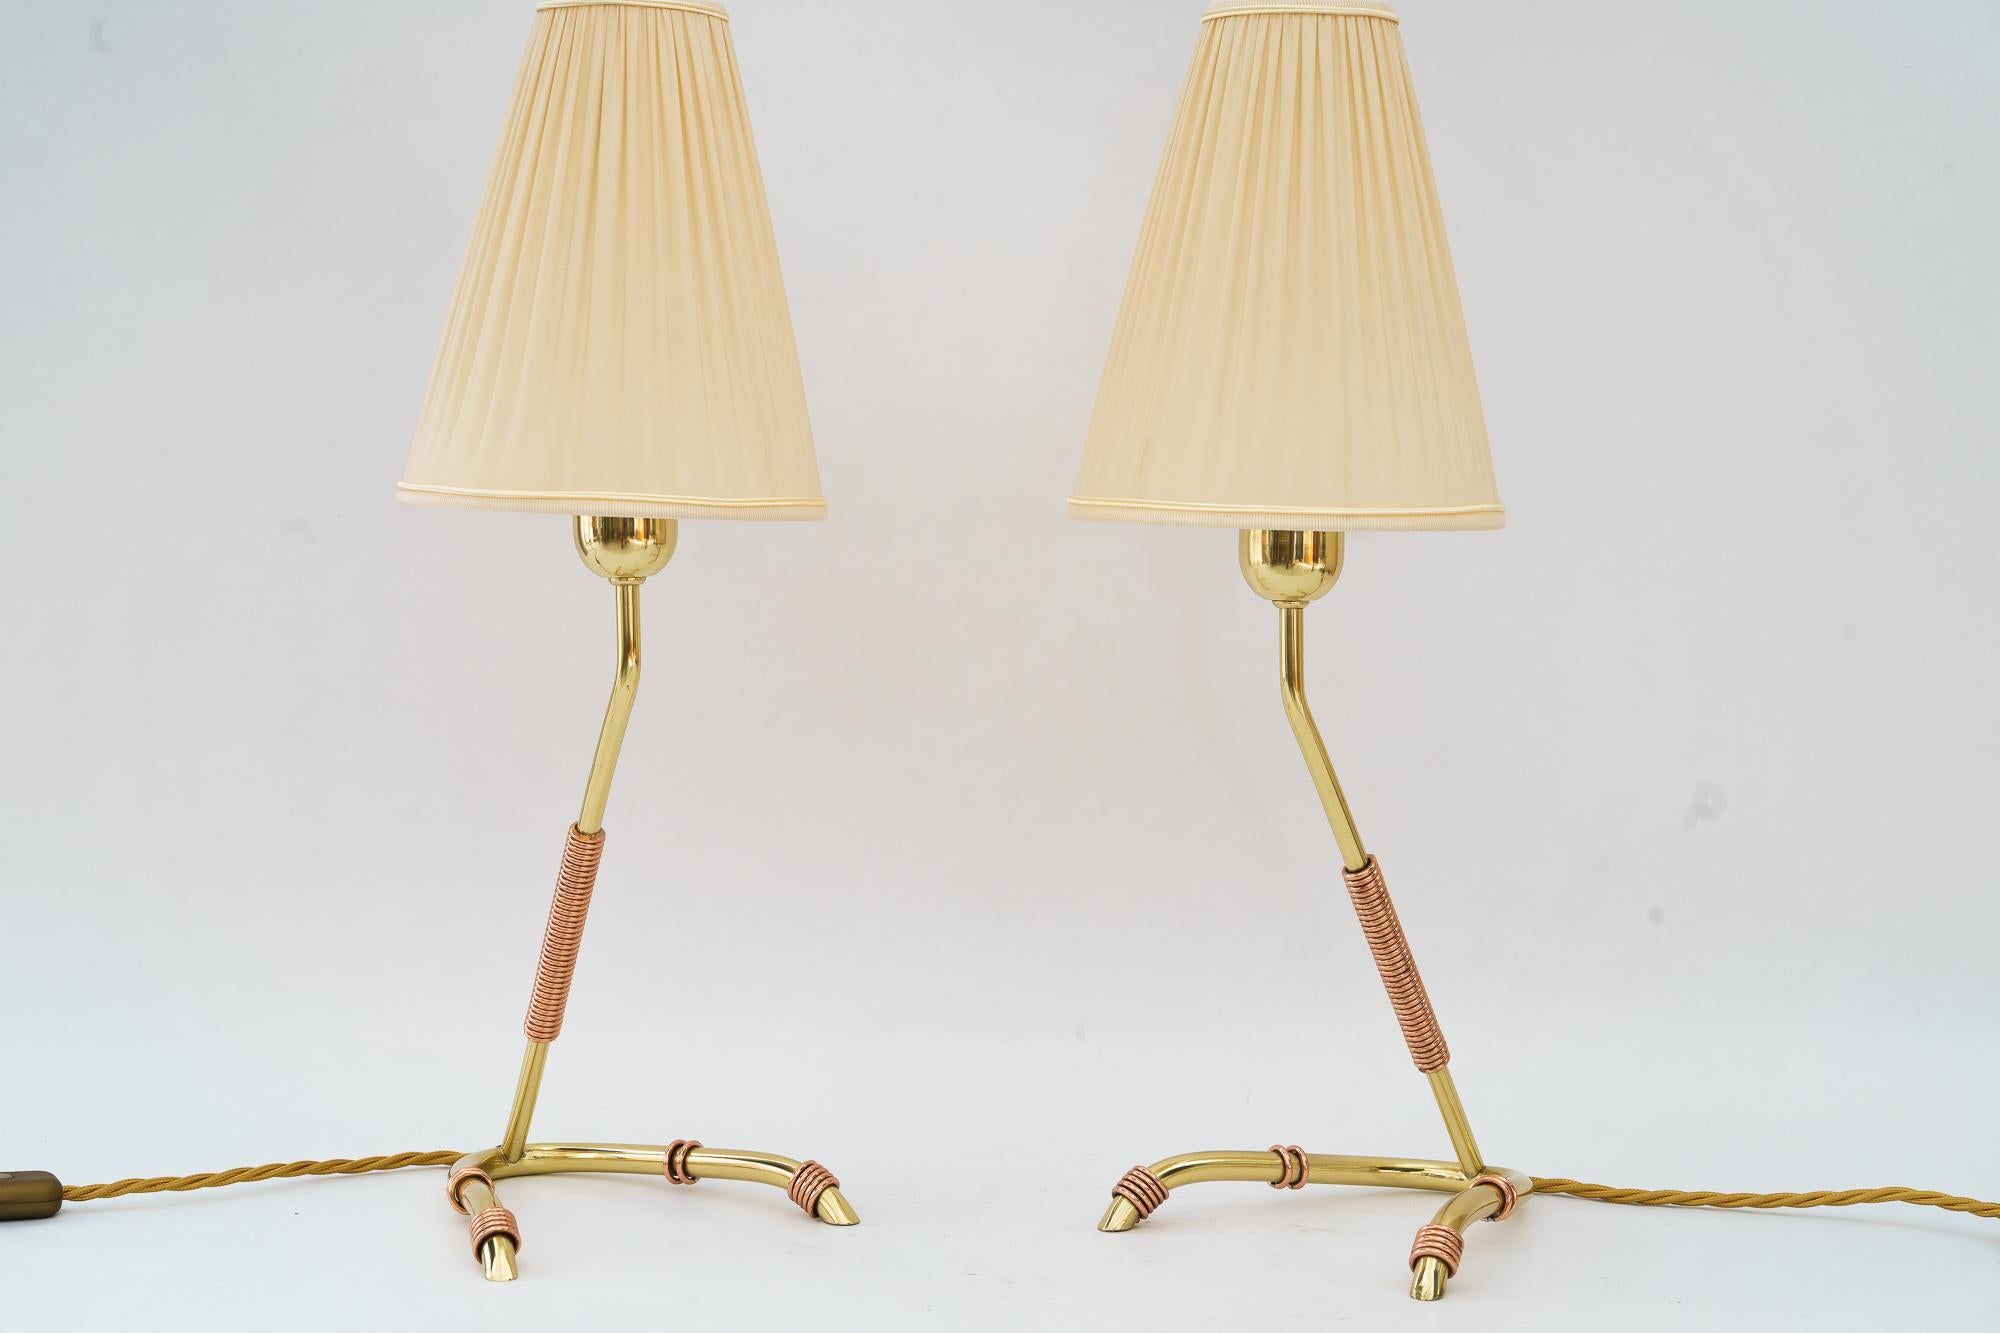 2 rare Rupert Nikoll table lamp vienna around 1950s
Brass polished and stove enameled
fabric shade is replaced ( new )